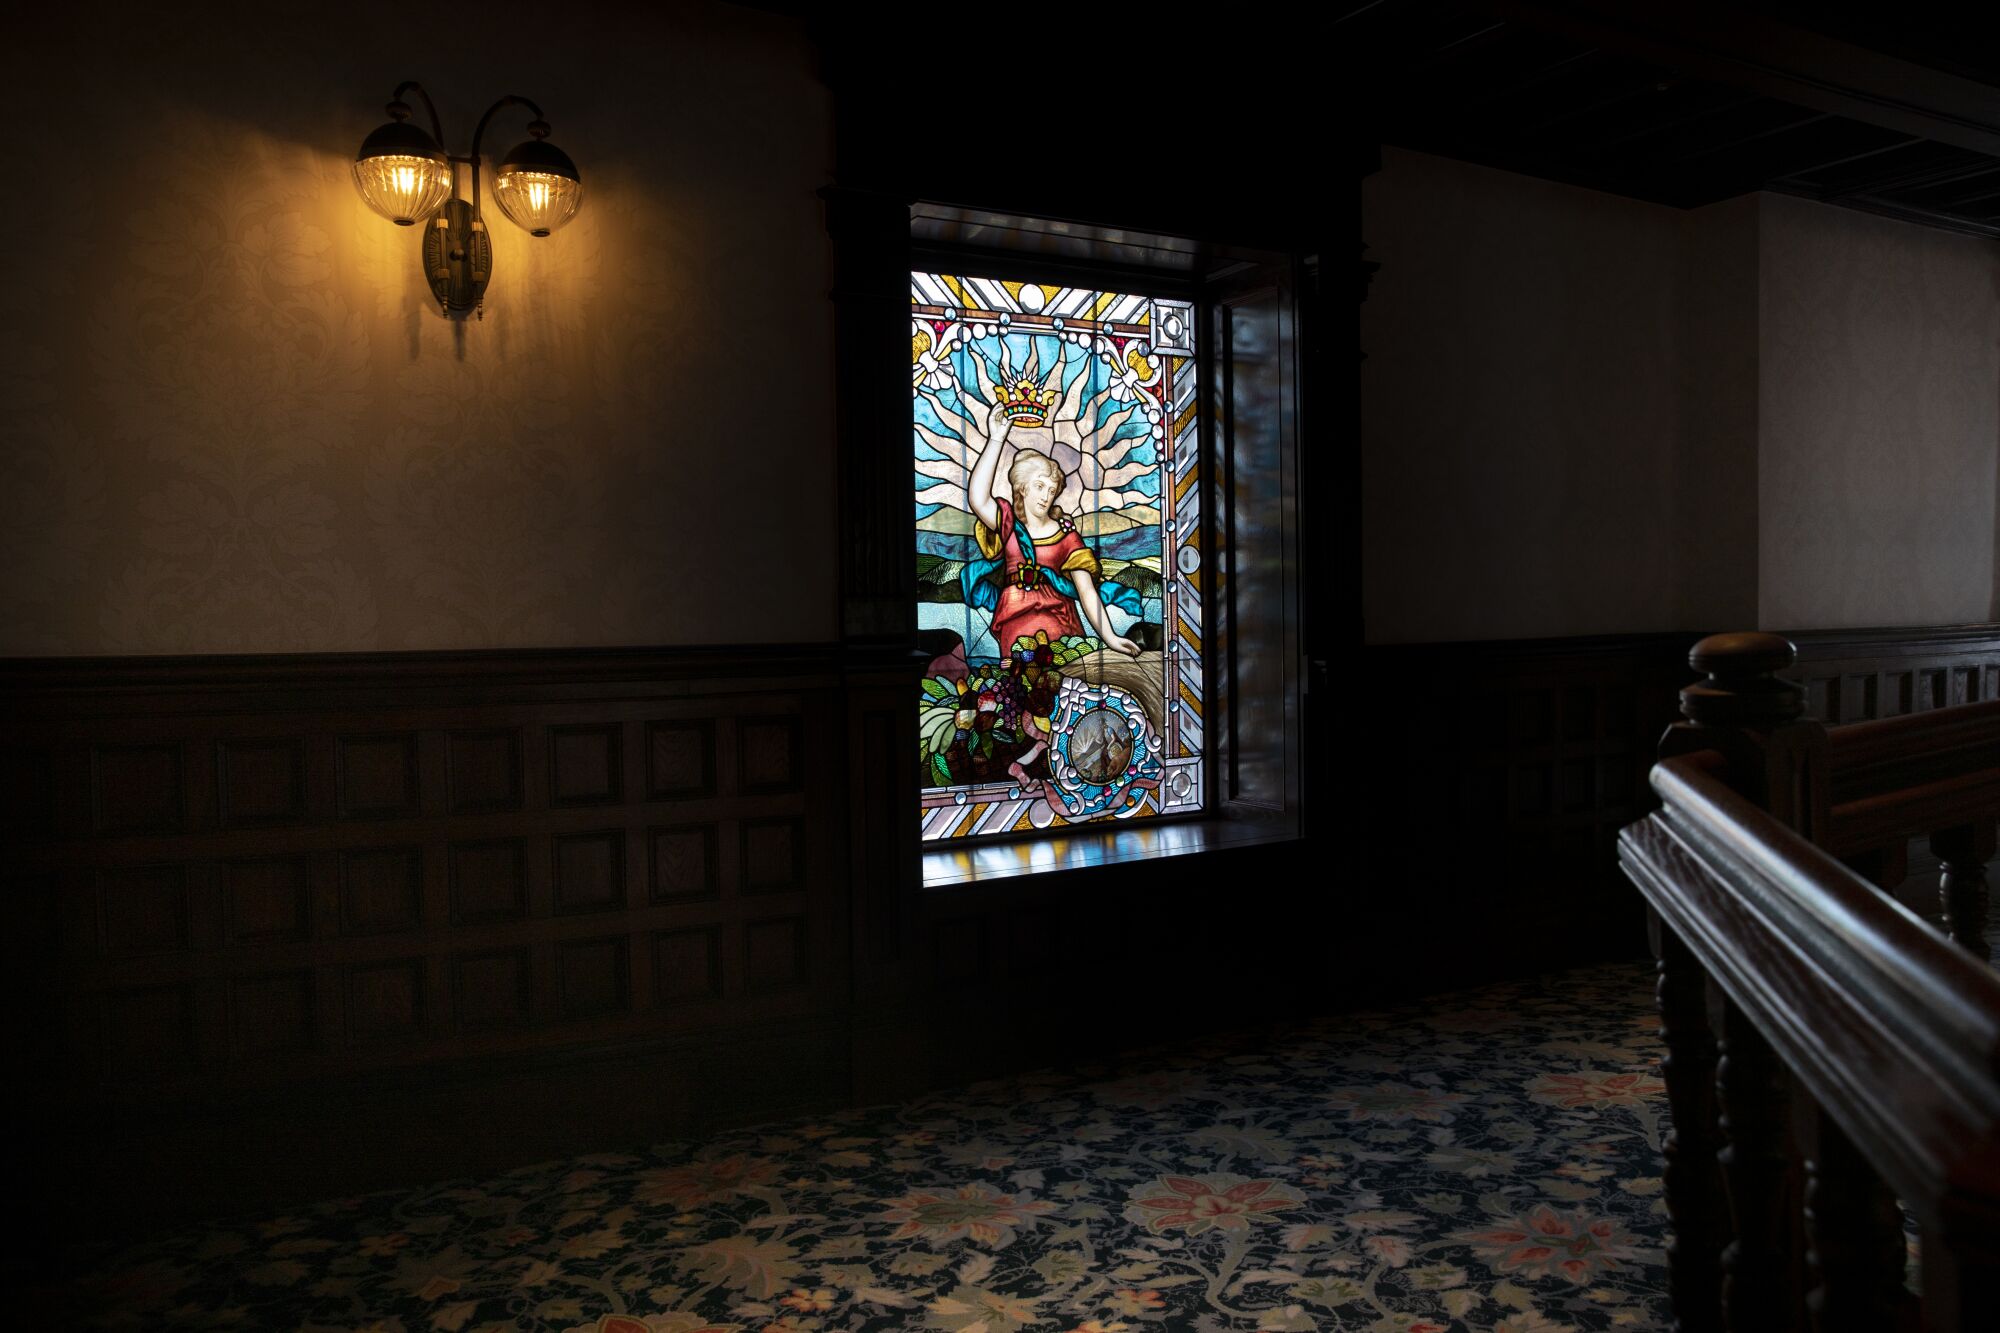  Restored stained glass window called "The Coronation Window"